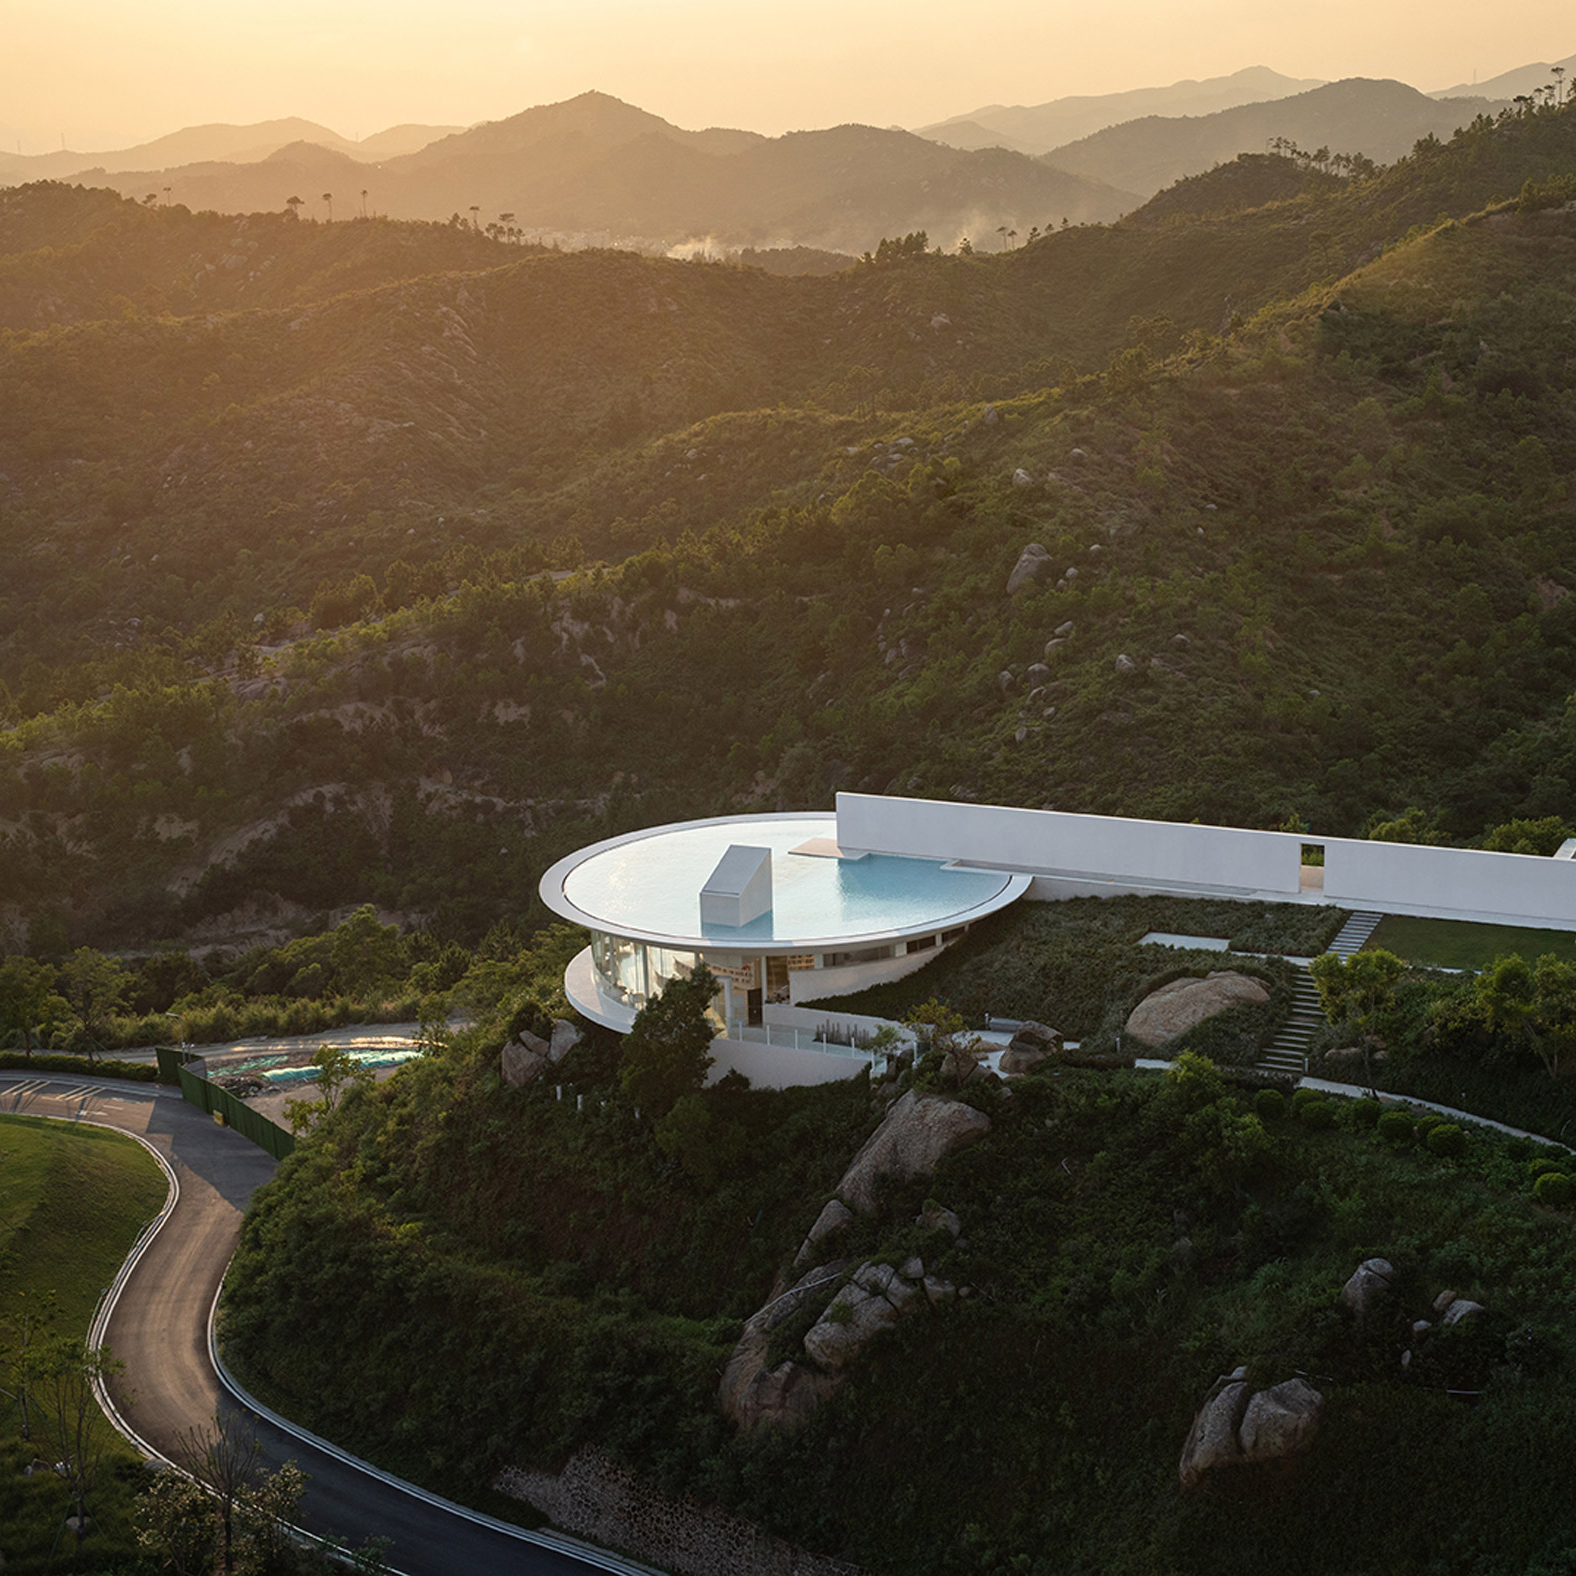 Water Drop Library in Shuangyue Bay, China, by 3andwich Design